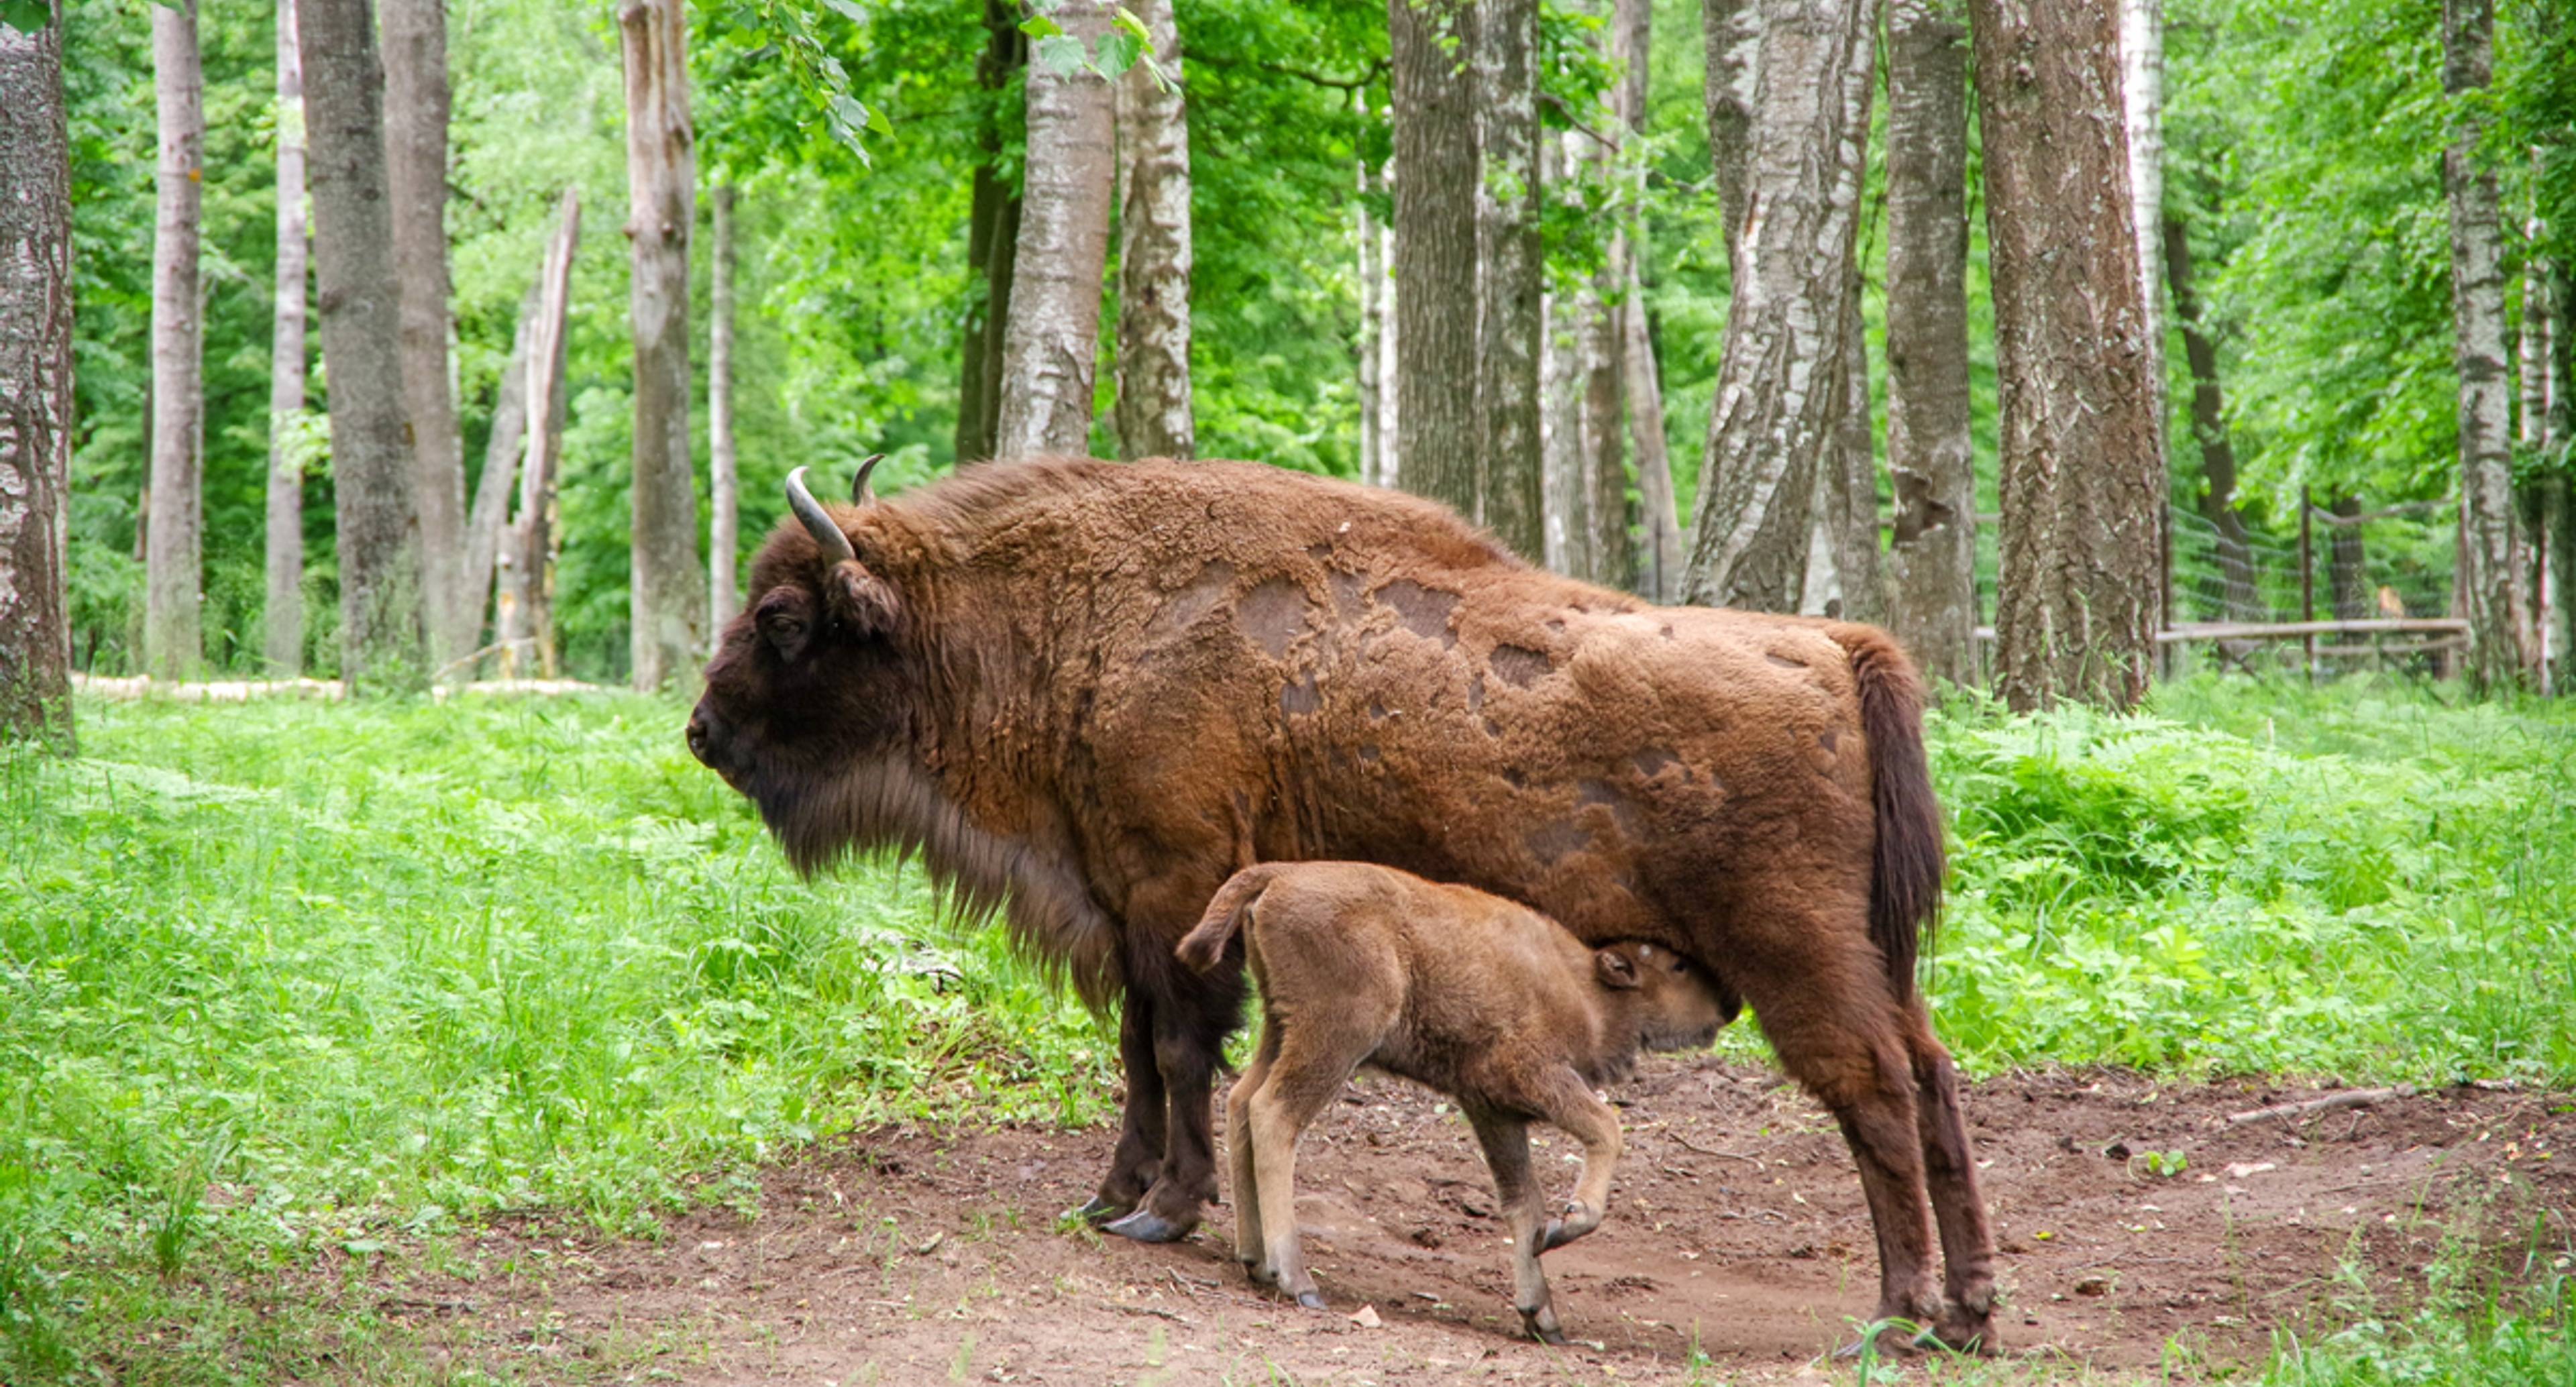 Visiting the bison.